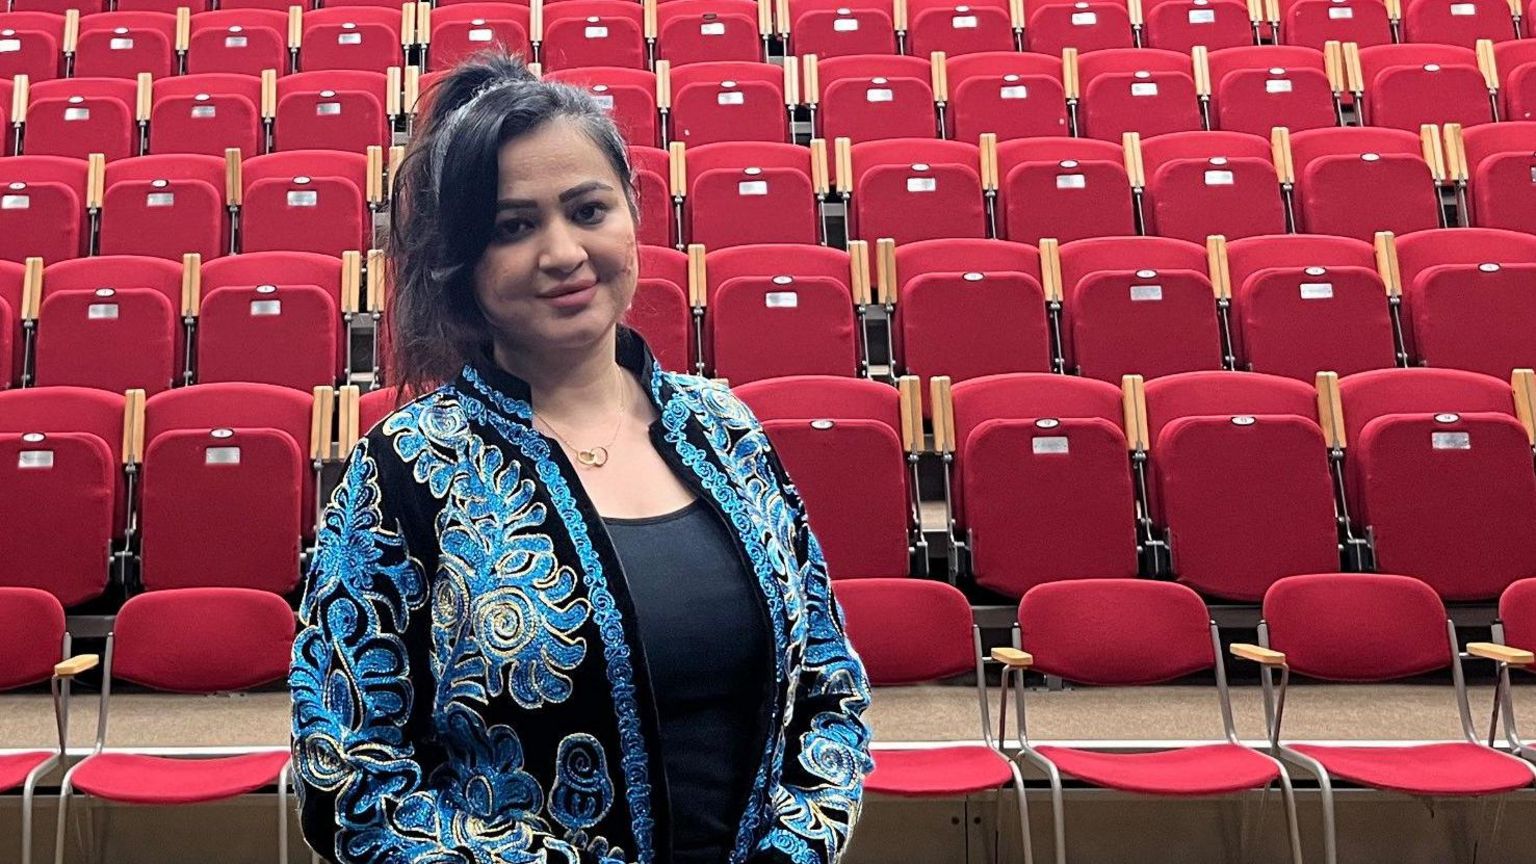 Maryam Arif wears a blue and black embroidered jacket, standing in an empty theatre